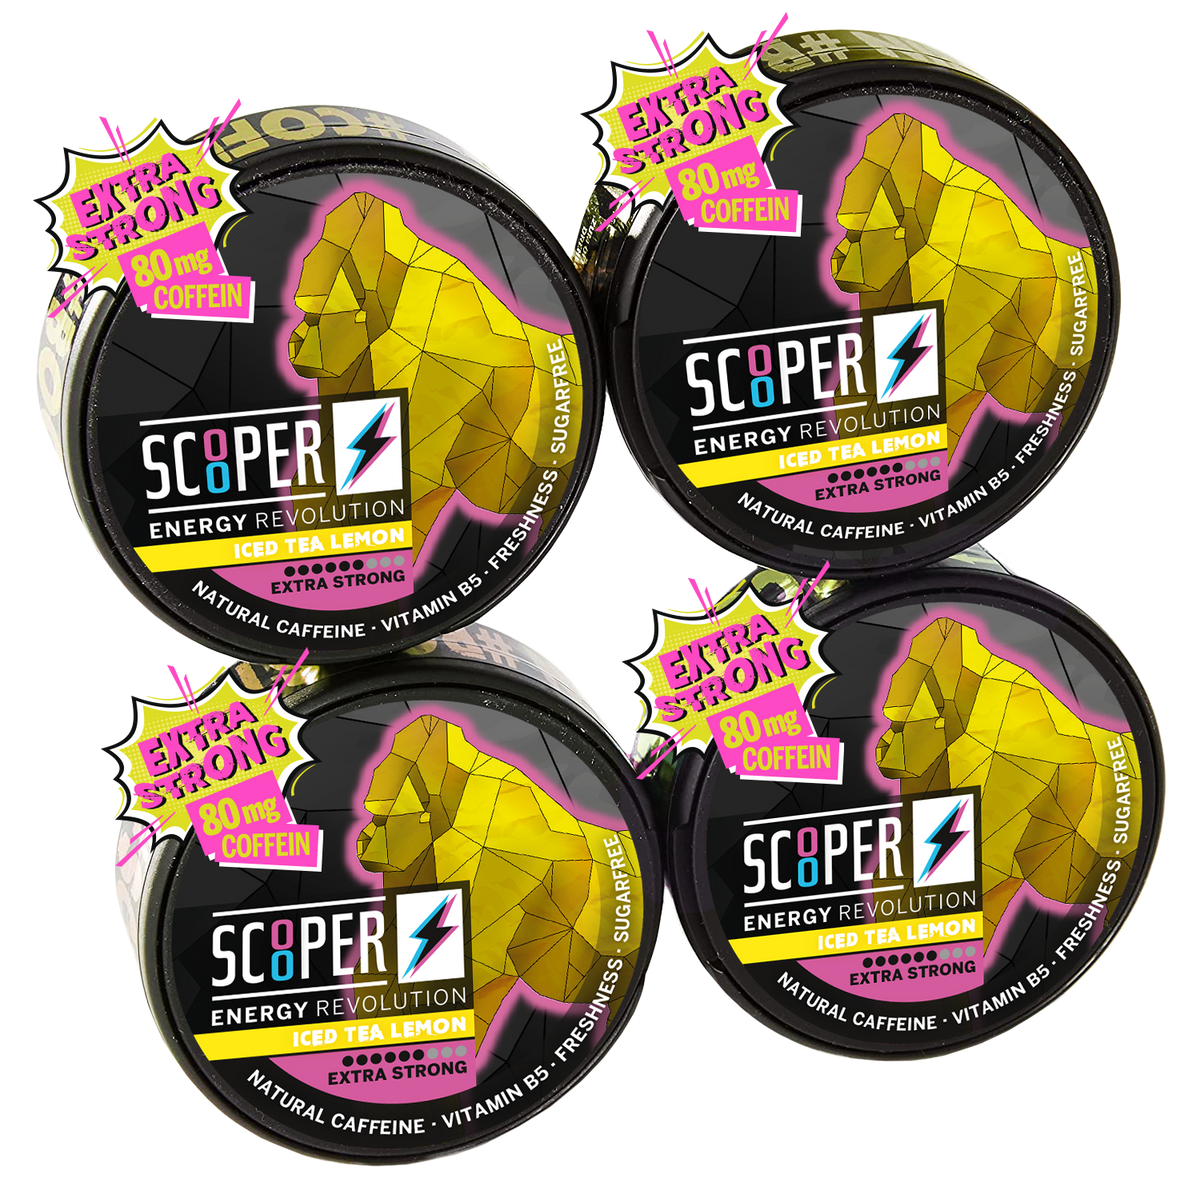 SCOOPER Energy Iced Tea Lemon Extra Strong Box (4 cans)